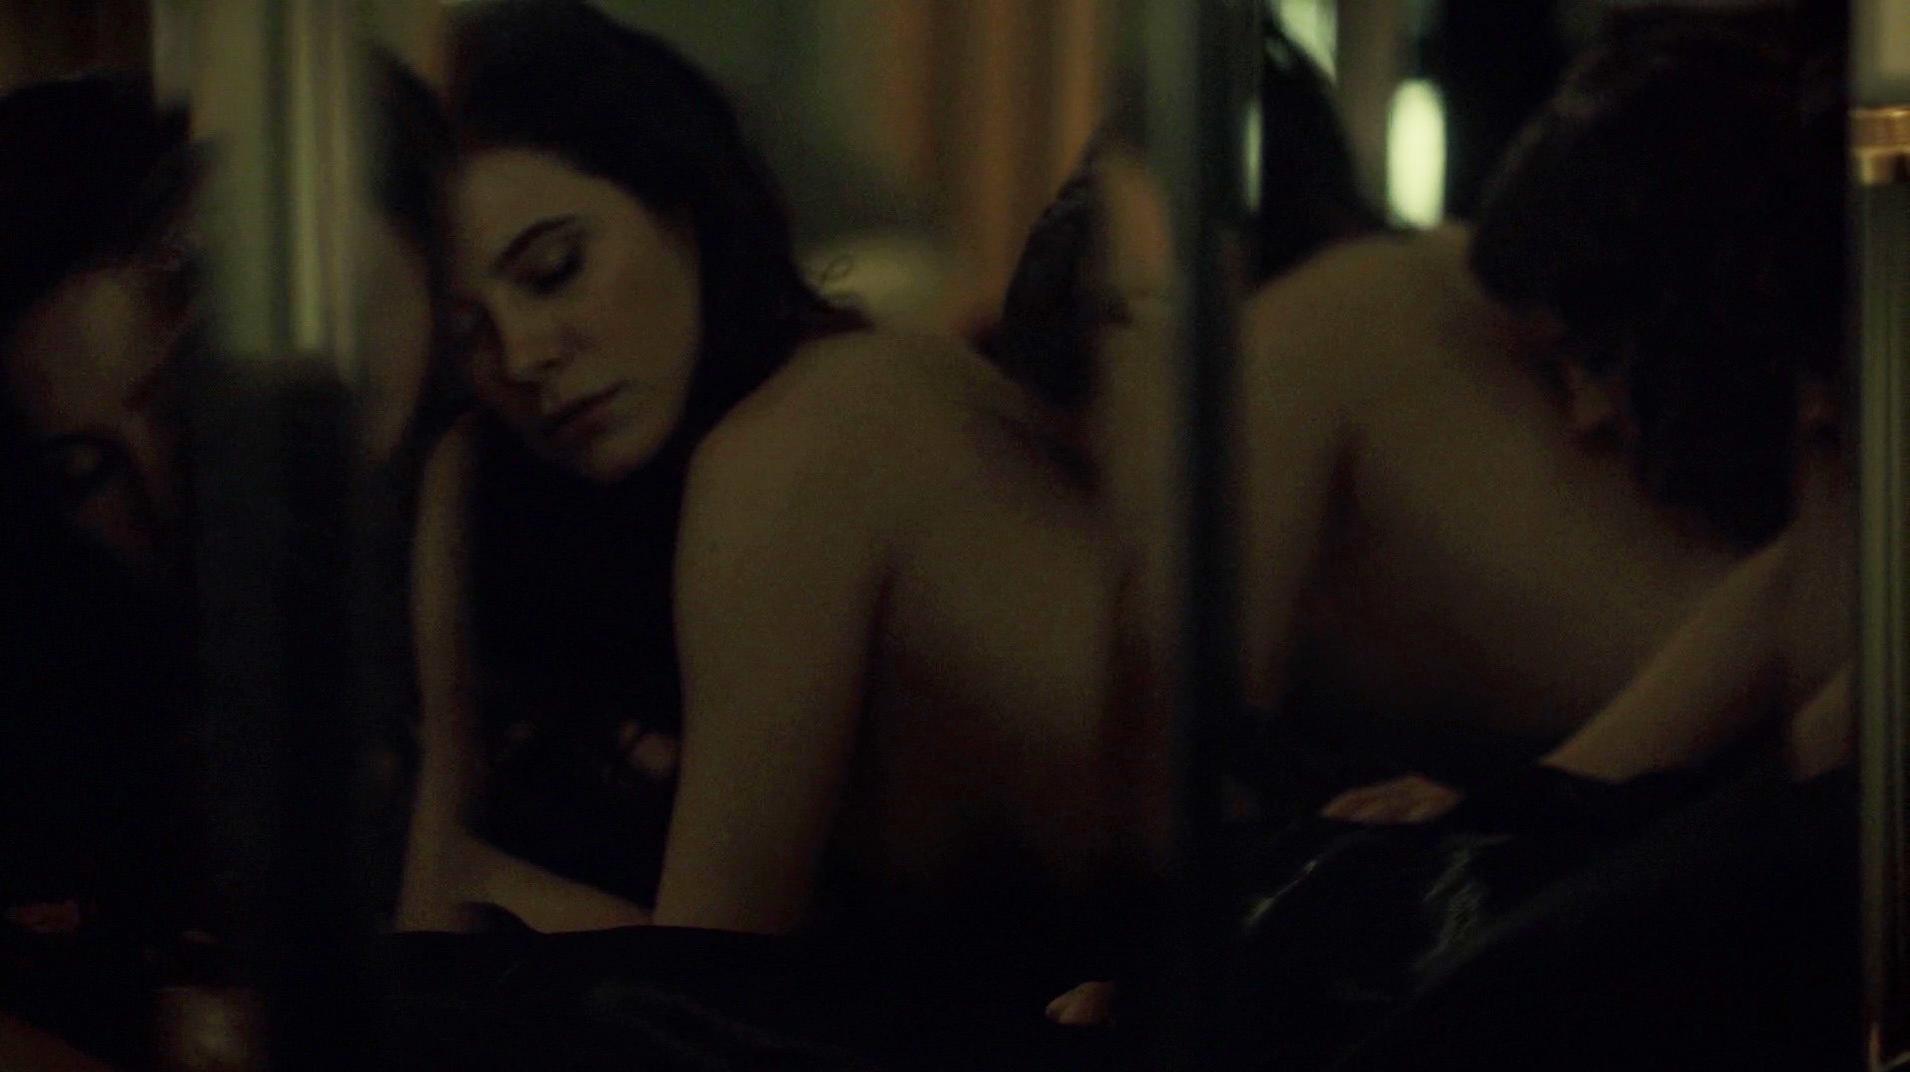 Katharine Isabelle sexy, Caroline Dhavernas sexy - Hannibal s03e06 (2015)